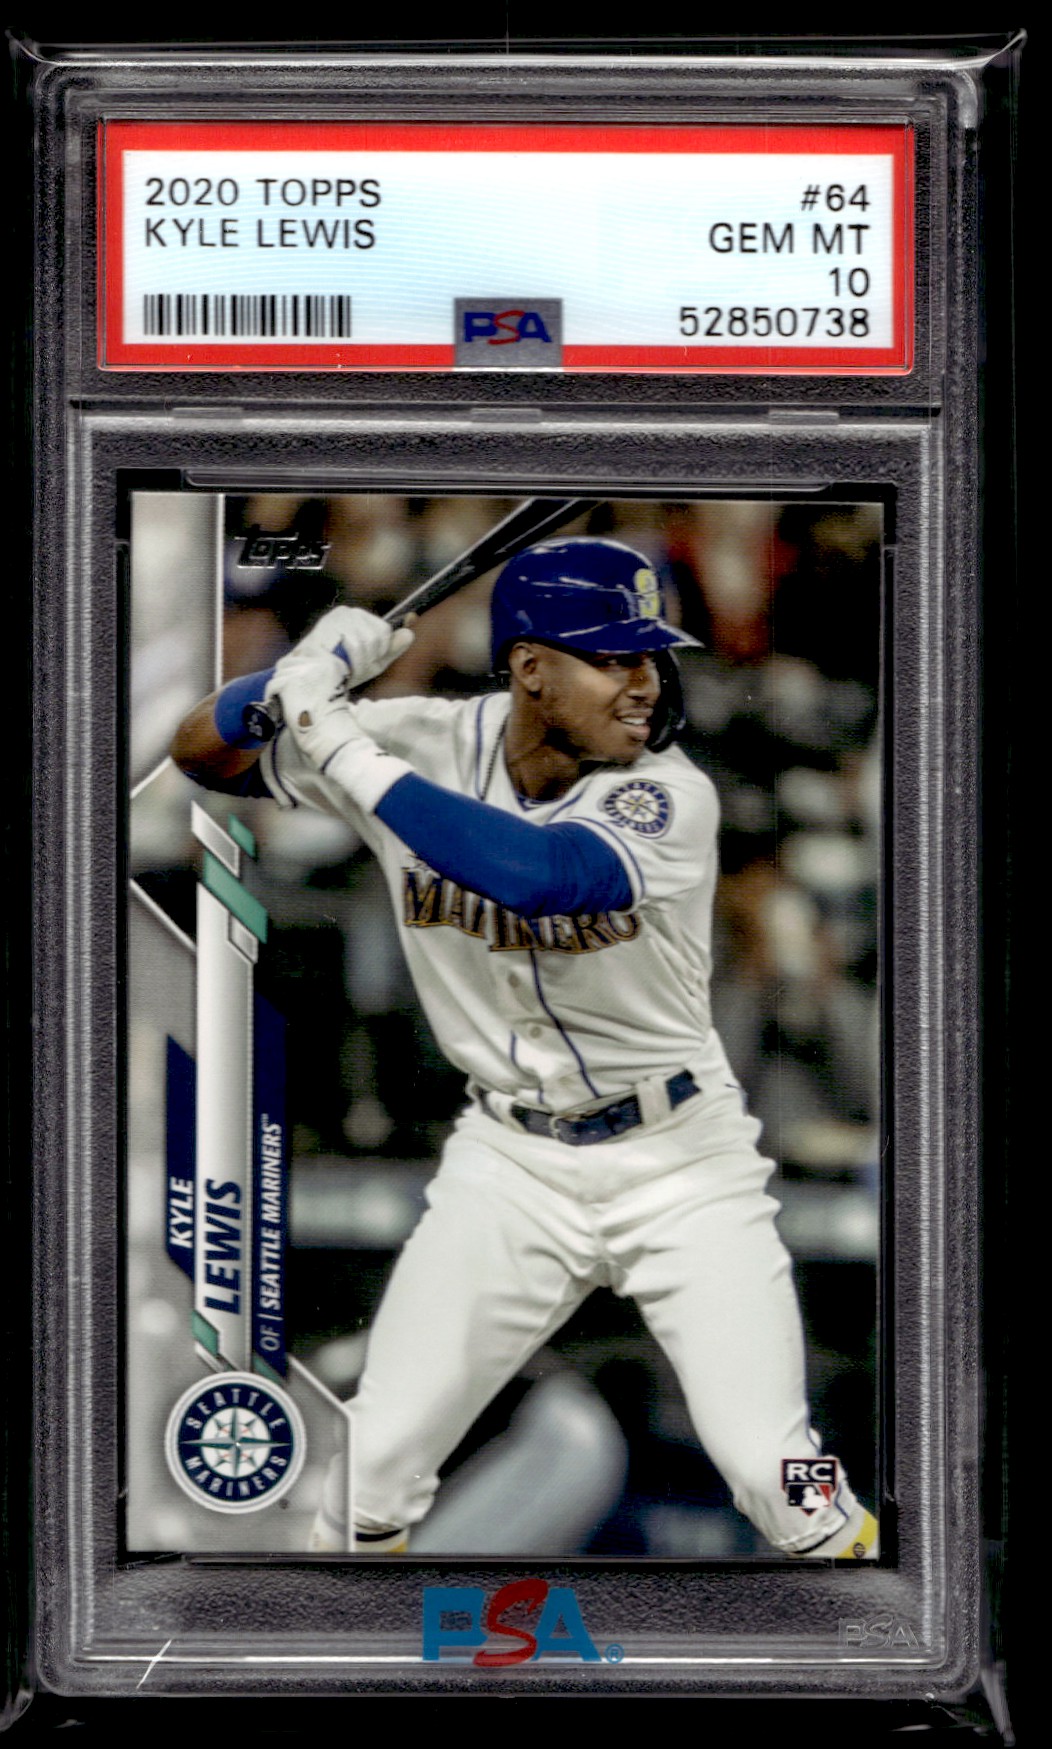 2020 Topps Kyle Lewis #64 card front image